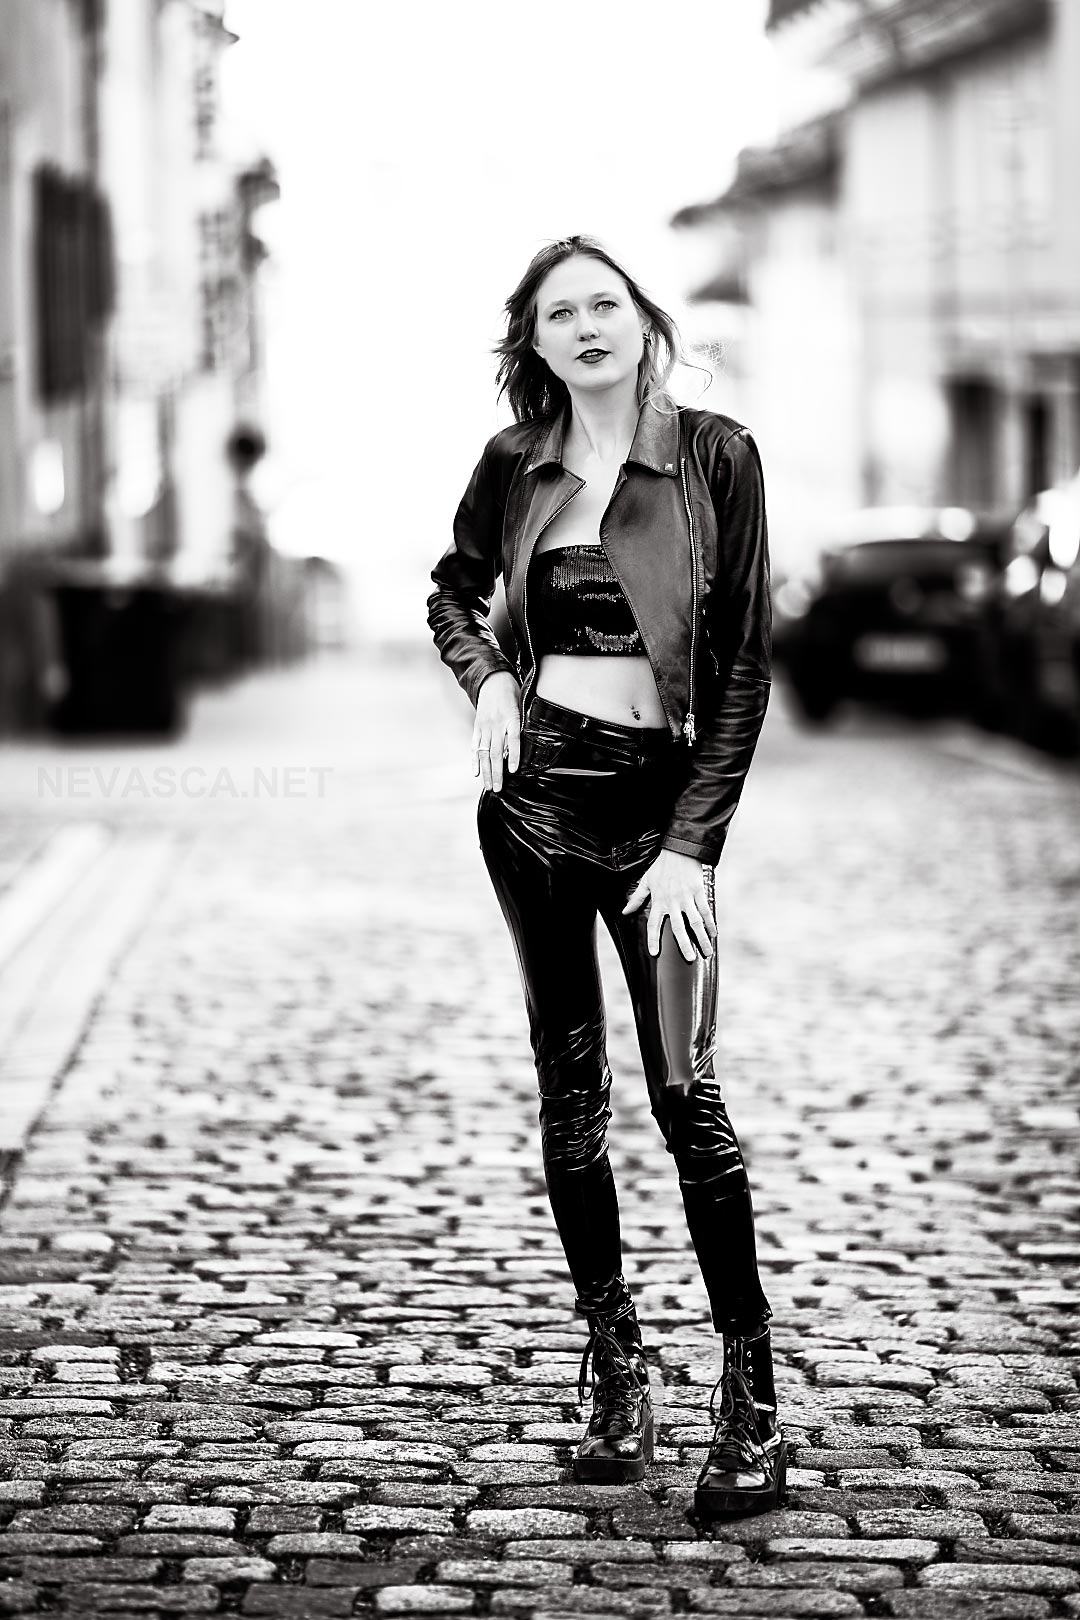 A young woman wearing leather trousers is standing on a cobble stone pavement.